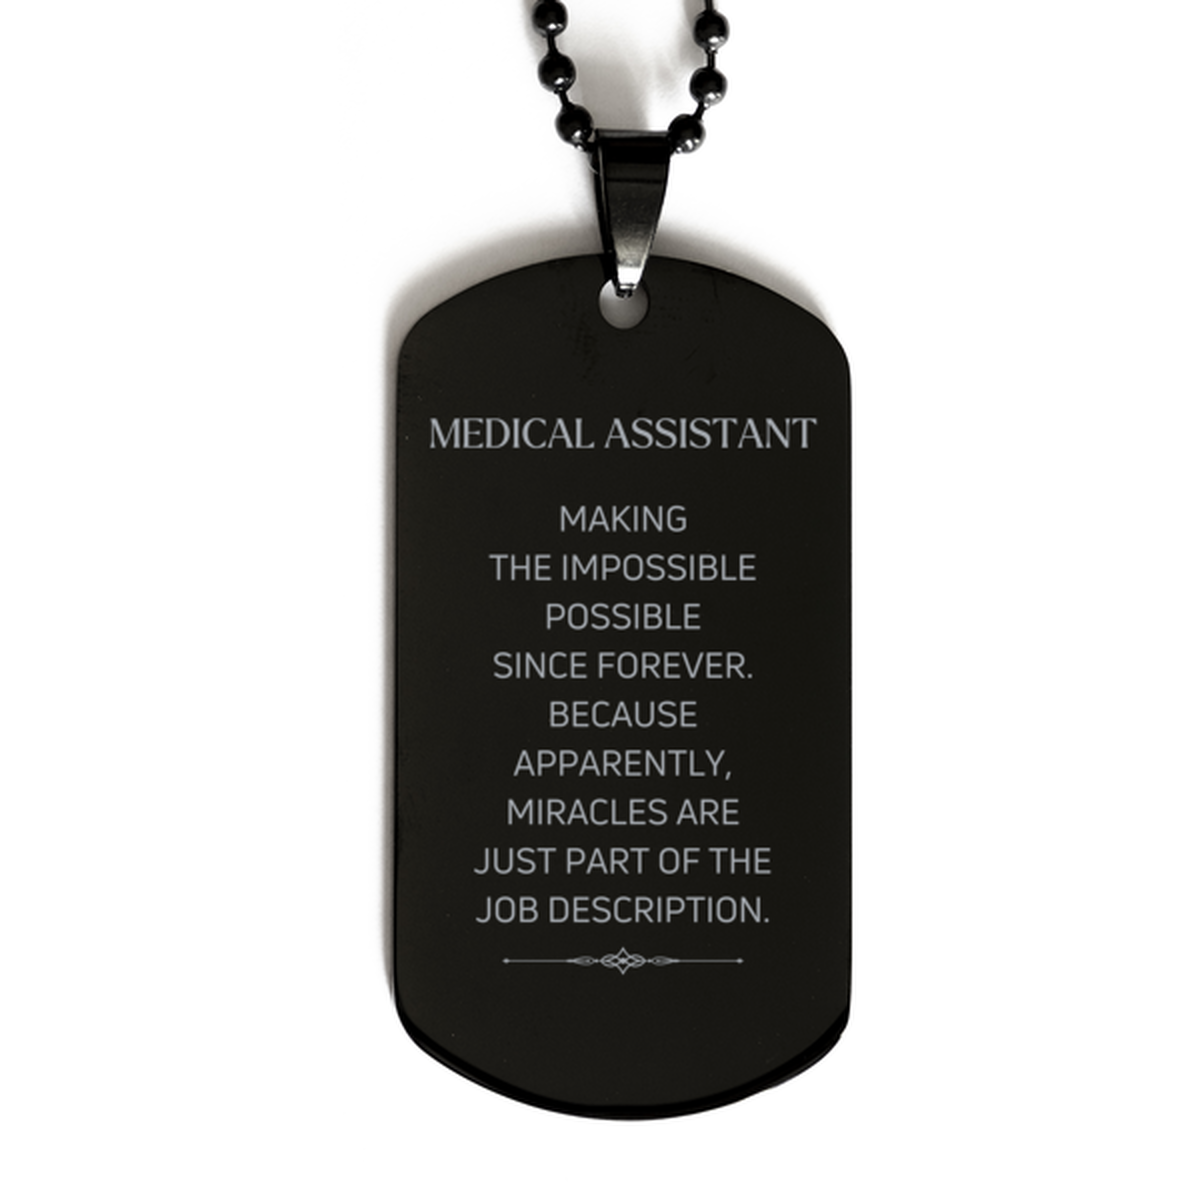 Funny Medical Assistant Gifts, Miracles are just part of the job description, Inspirational Birthday Black Dog Tag For Medical Assistant, Men, Women, Coworkers, Friends, Boss